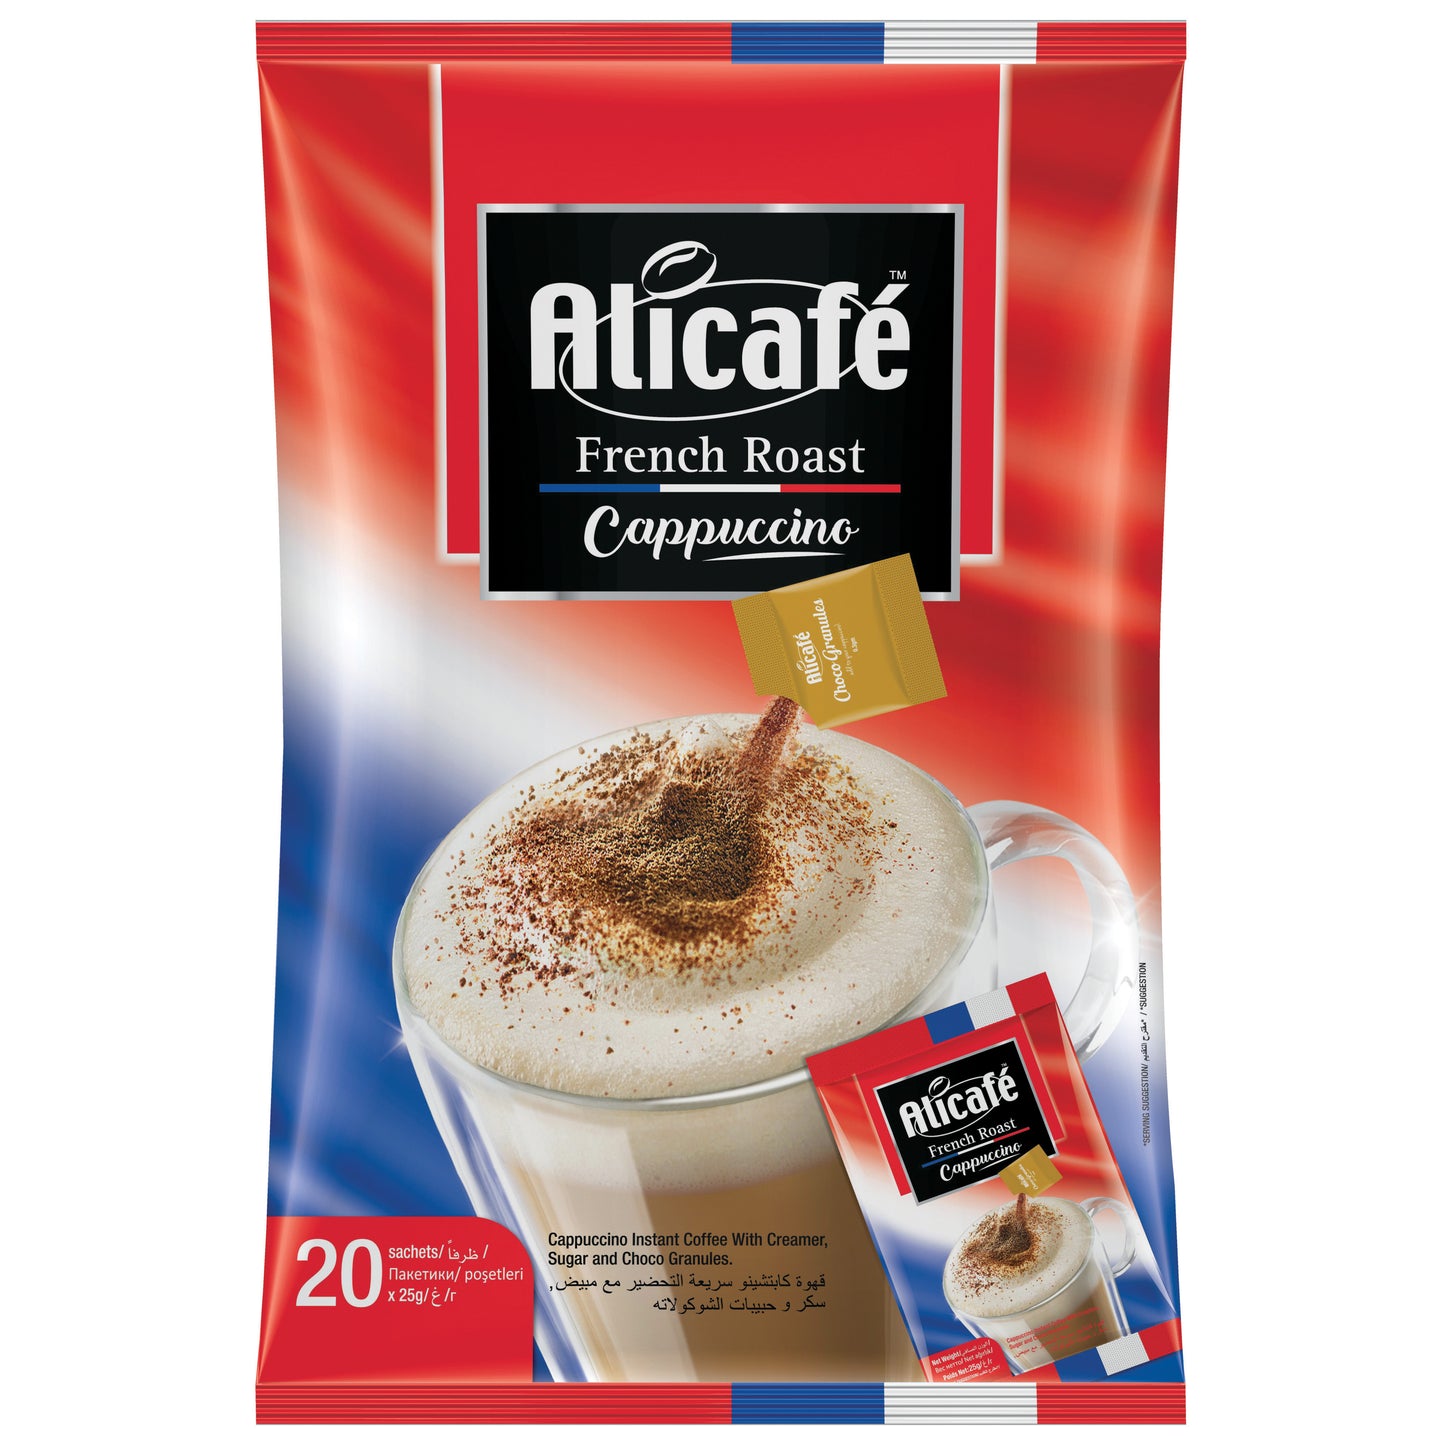 Alicafe French Roast Cappuccino with Choco Granules Sachets.